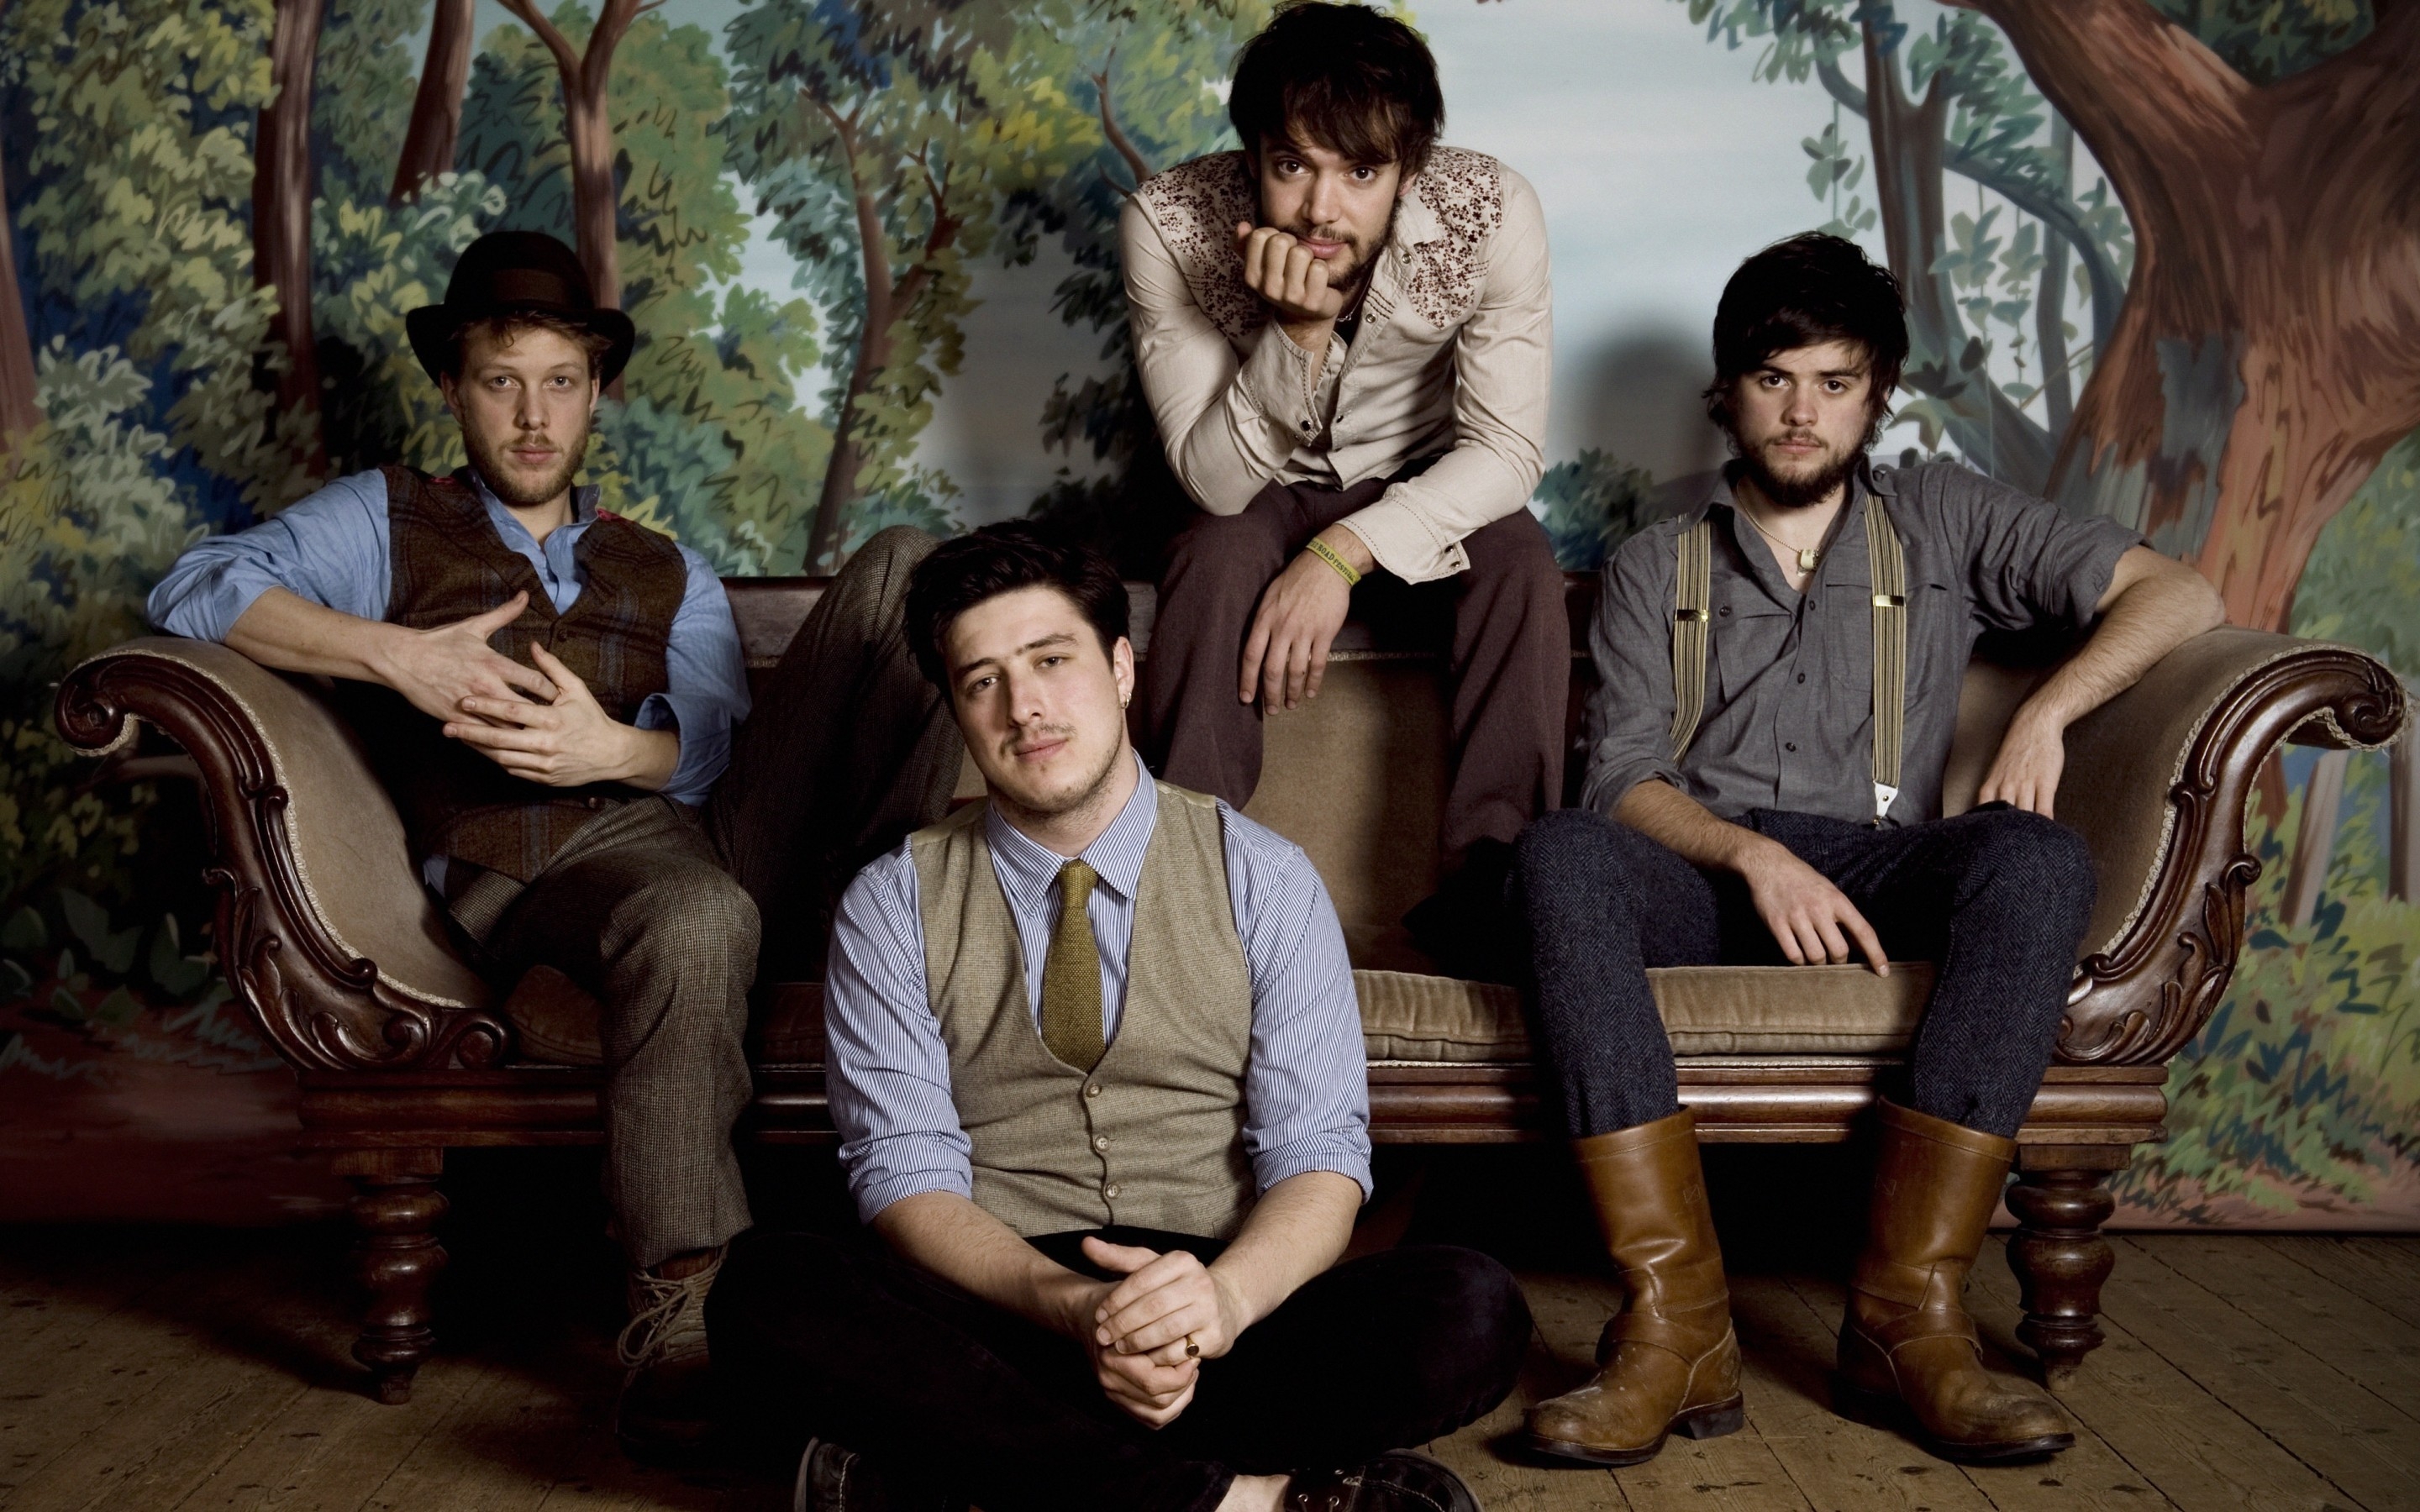 Mumford and Sons for 2880 x 1800 Retina Display resolution